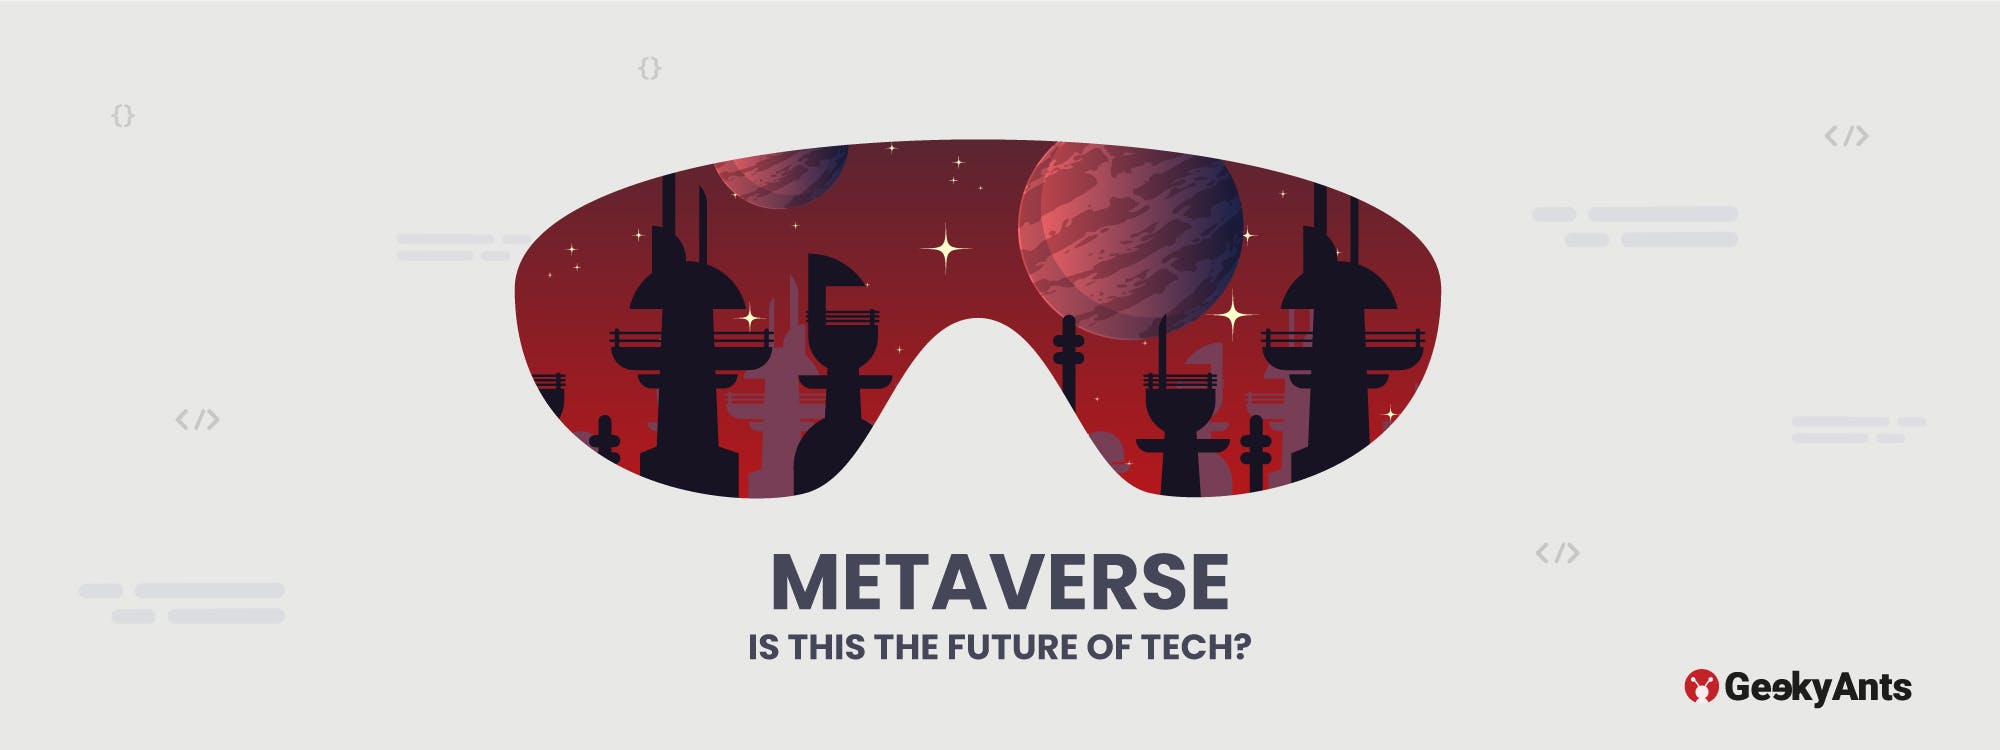 Metaverse: Is This The Future Of Tech?